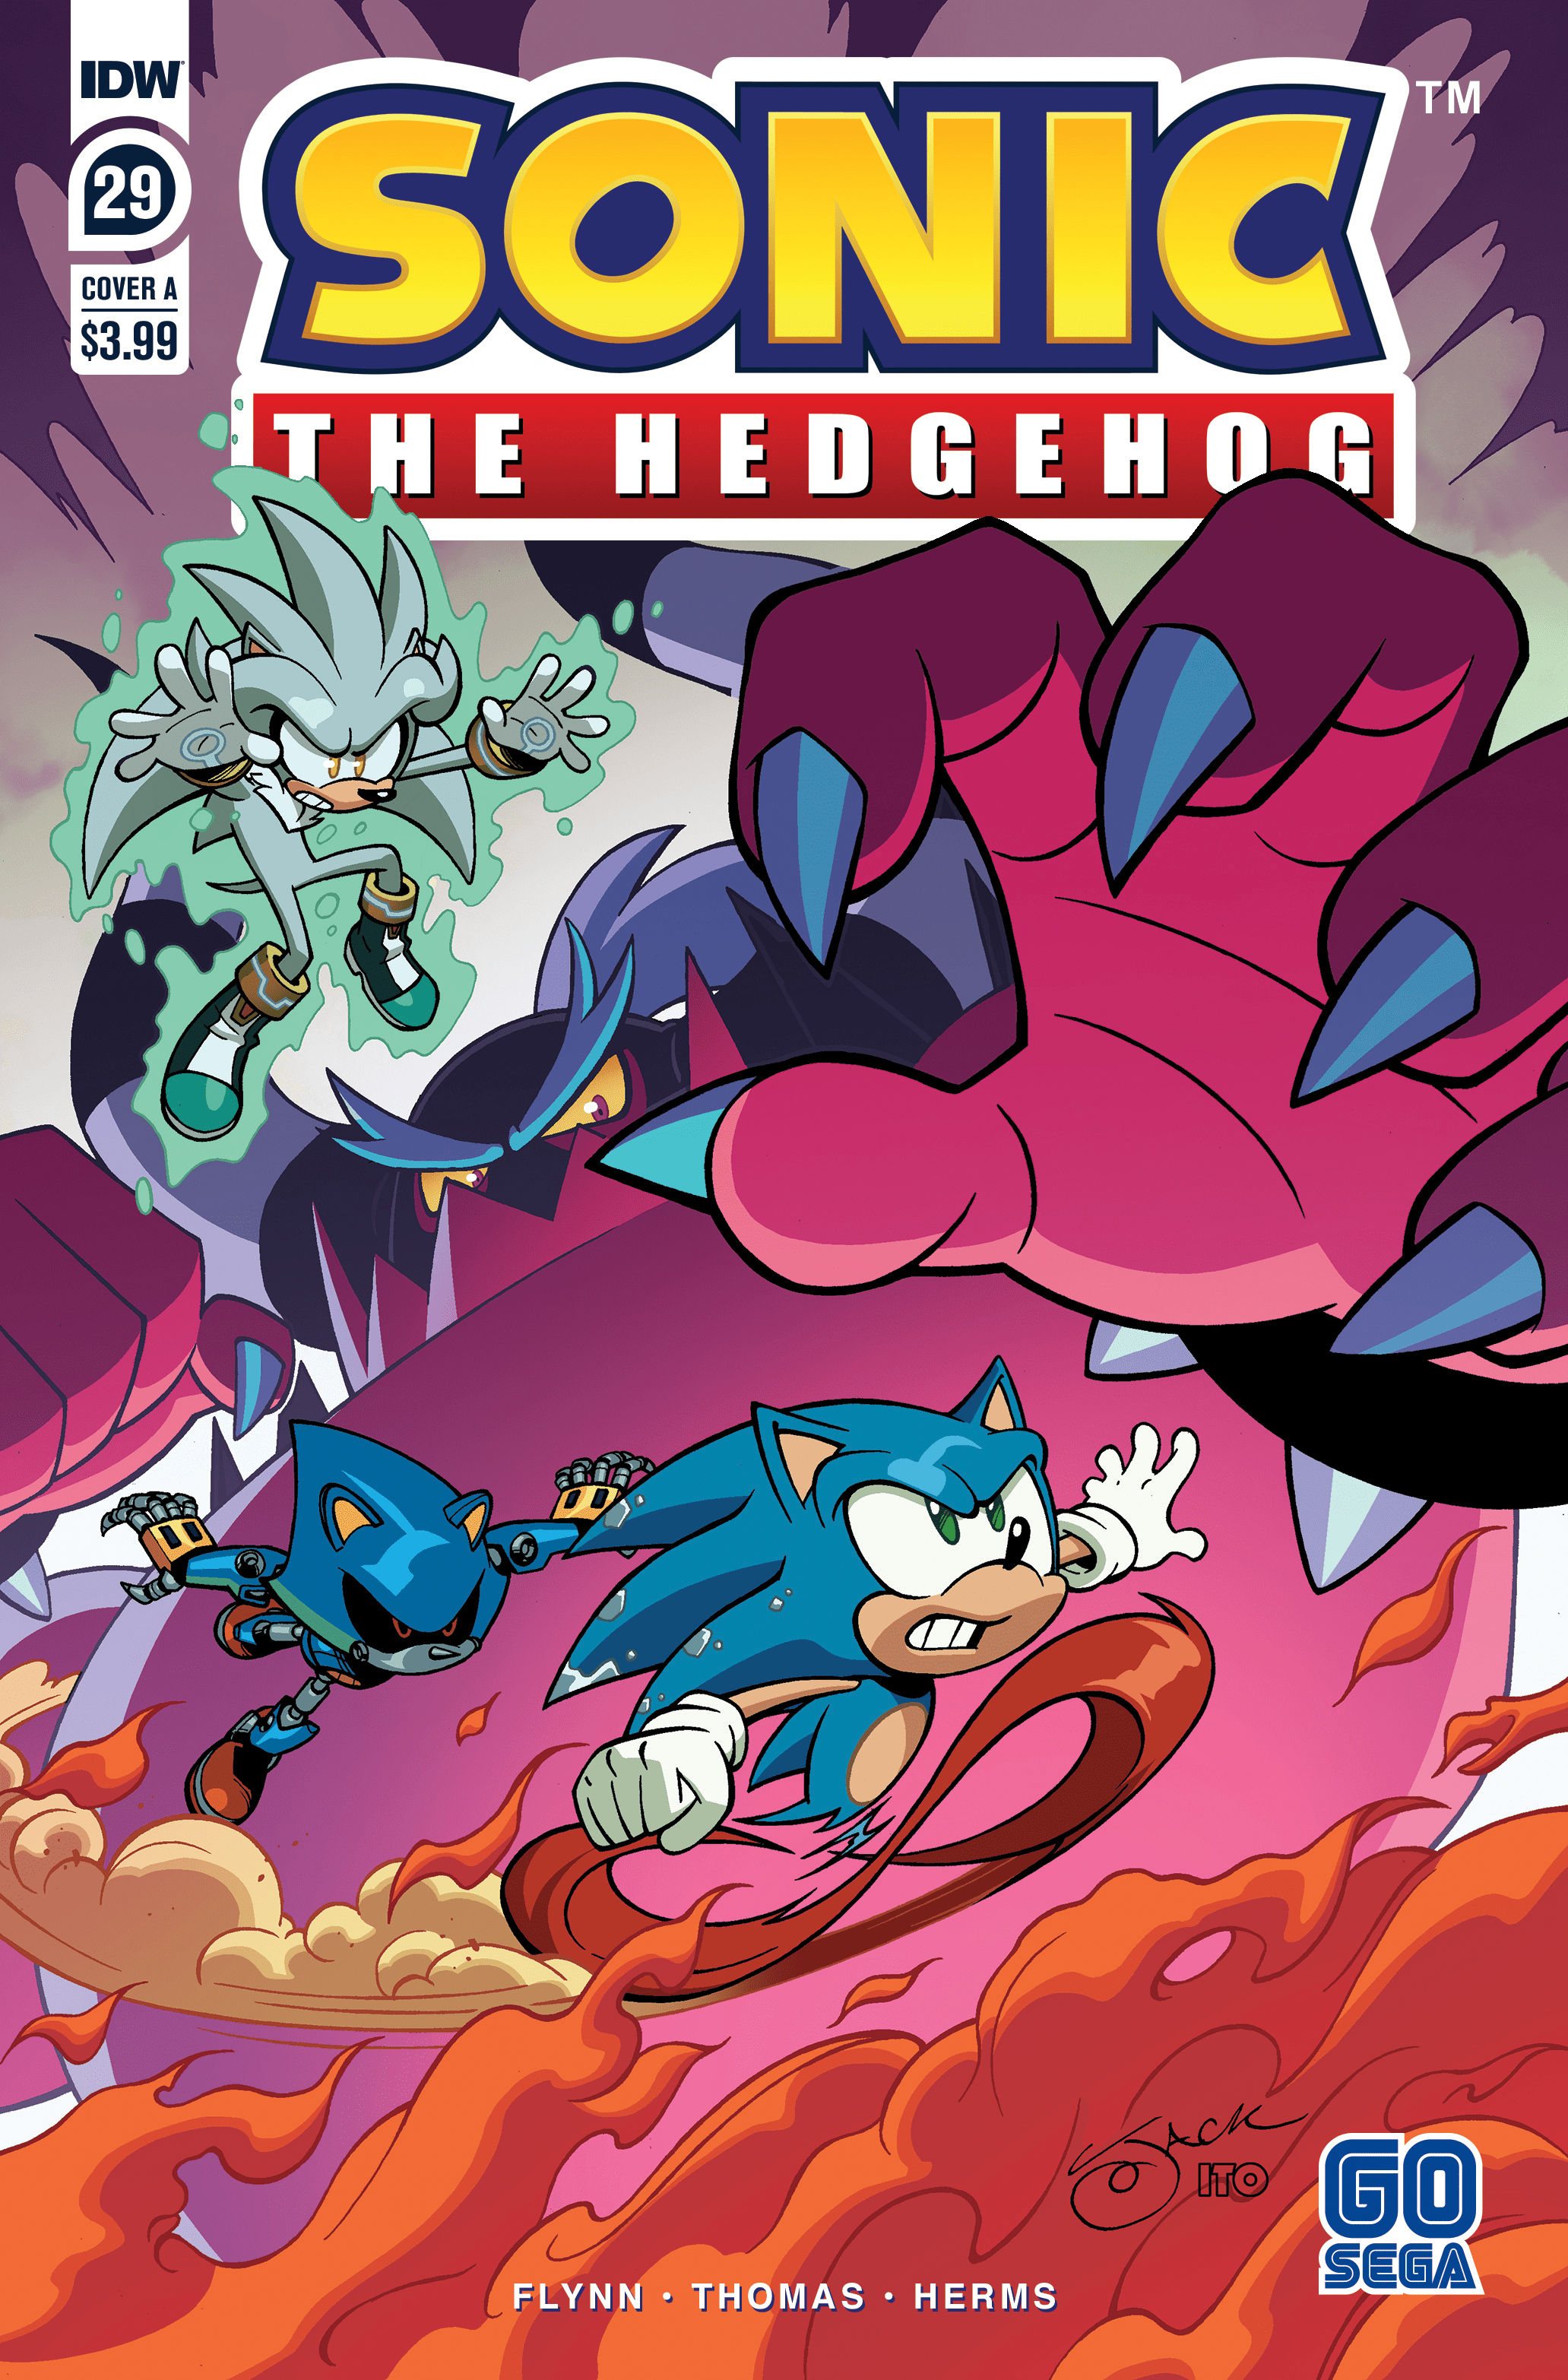 IDW Sonic the Hedgehog Issue 8, Wiki Sonic IDW News